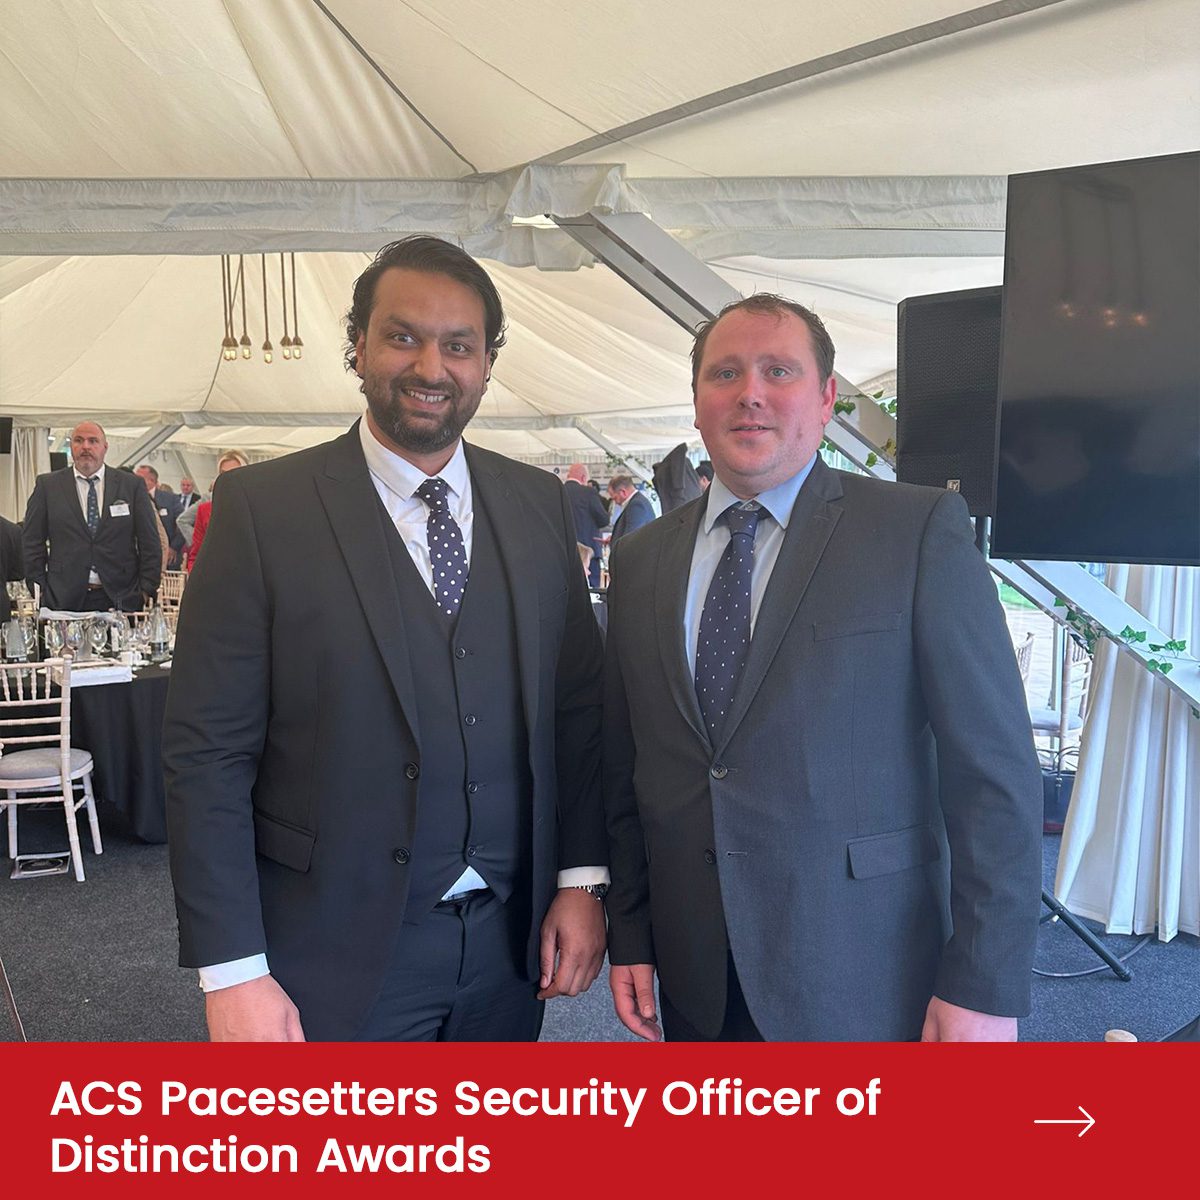 ACS Pacesetters Security Officer of Distinction Awards